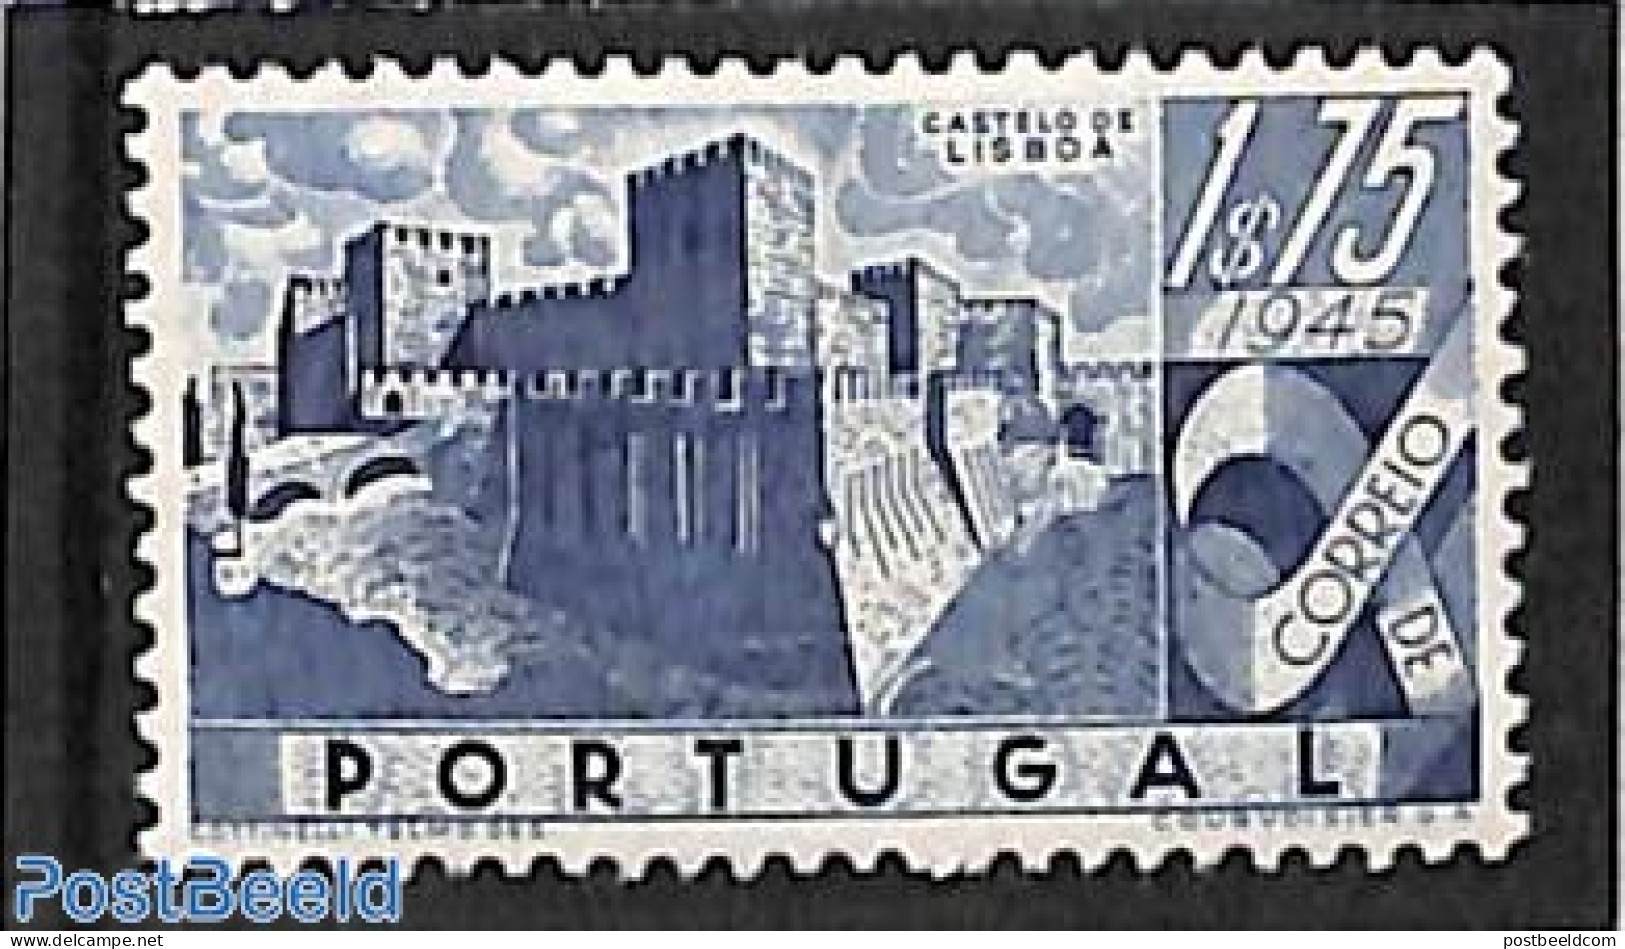 Portugal 1946 1.75E, Stamp Out Of Set, Unused (hinged), Art - Castles & Fortifications - Unused Stamps